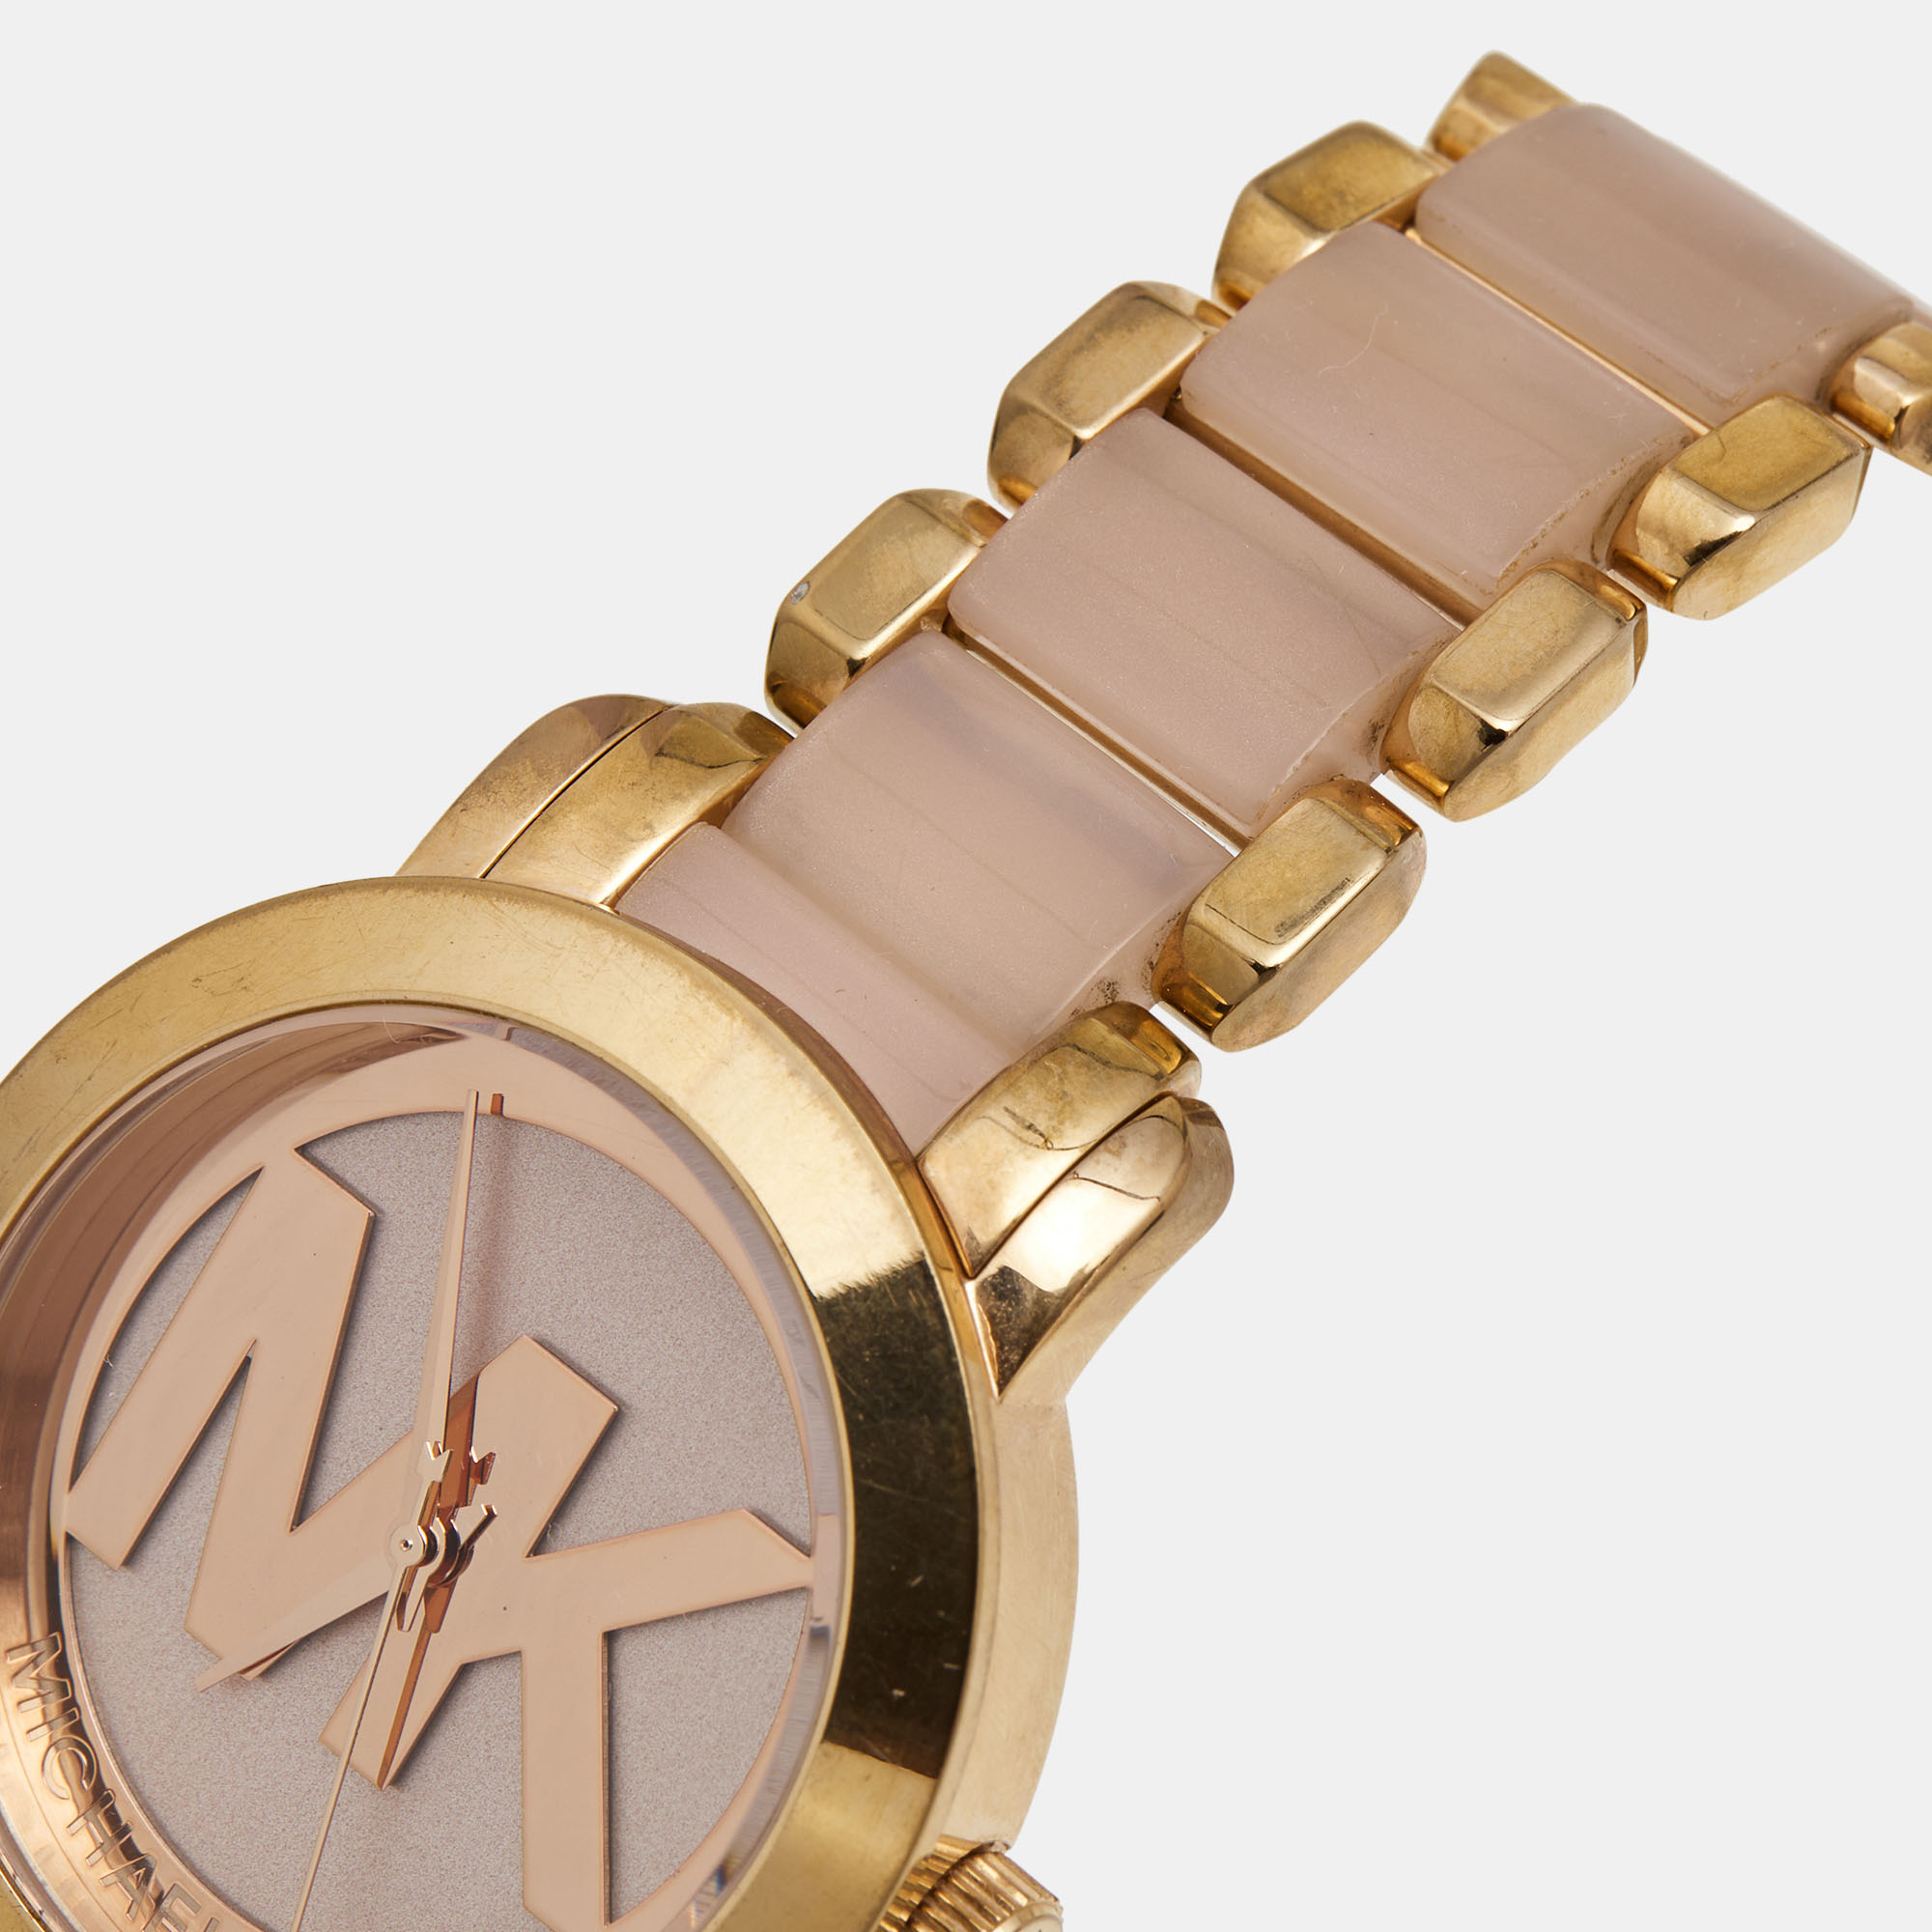 Michael Kors Champagne Rose Gold Plated Stainless Steel Acetate Runway MK4324 Women's Wristwatch 38 Mm